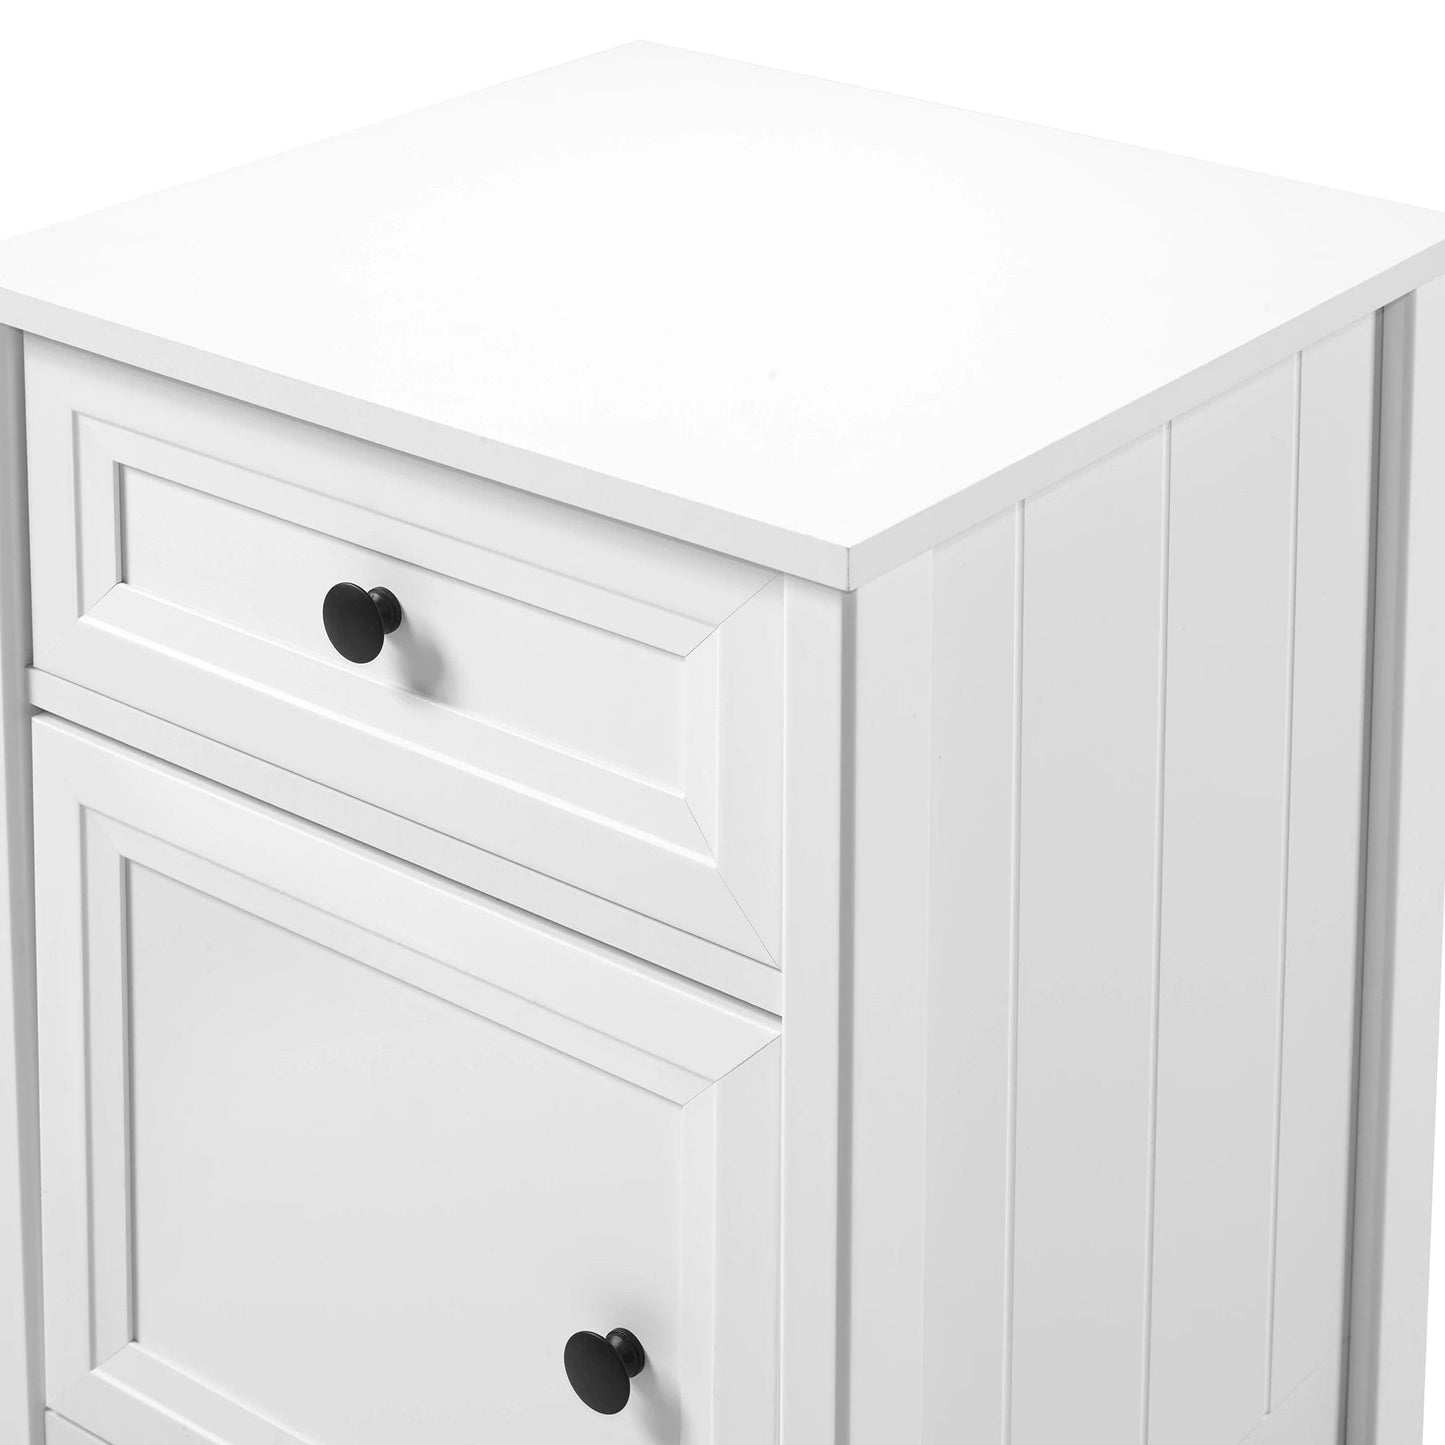 Handmade Customized wooden 1 Drawer and 1 cabinet Bedside Table